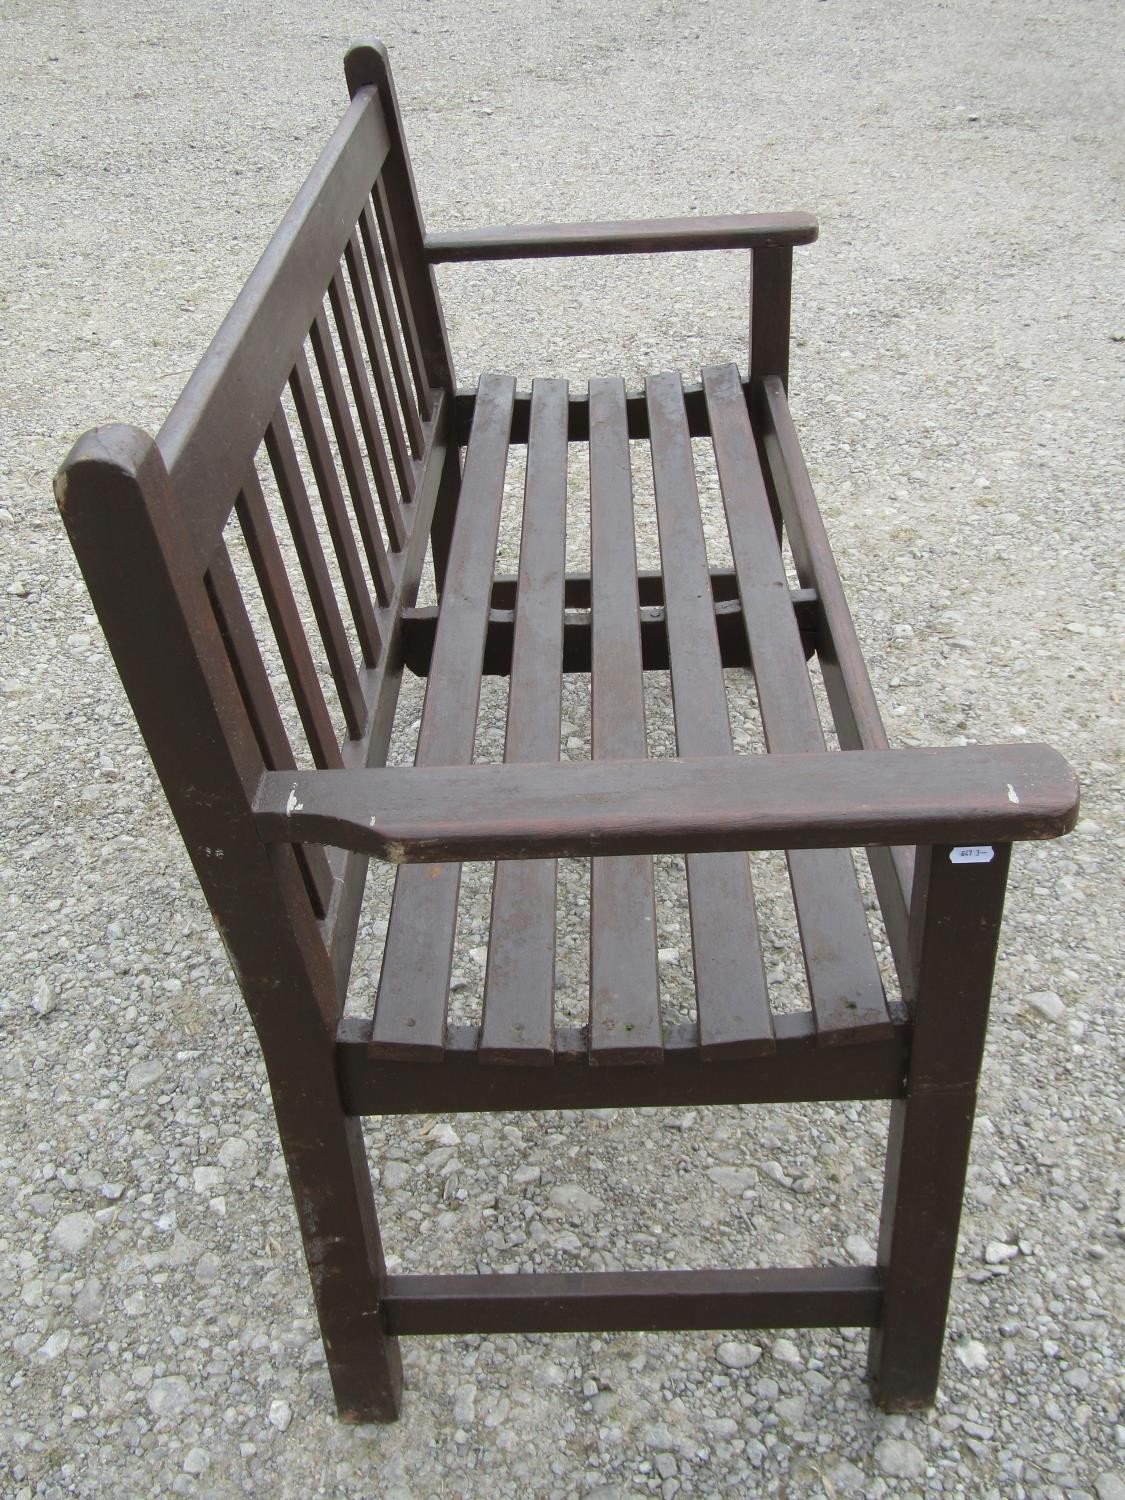 A Wrinch vintage stained teakwood two seat garden bench with slatted seat and back, 127 cm wide - Image 2 of 4